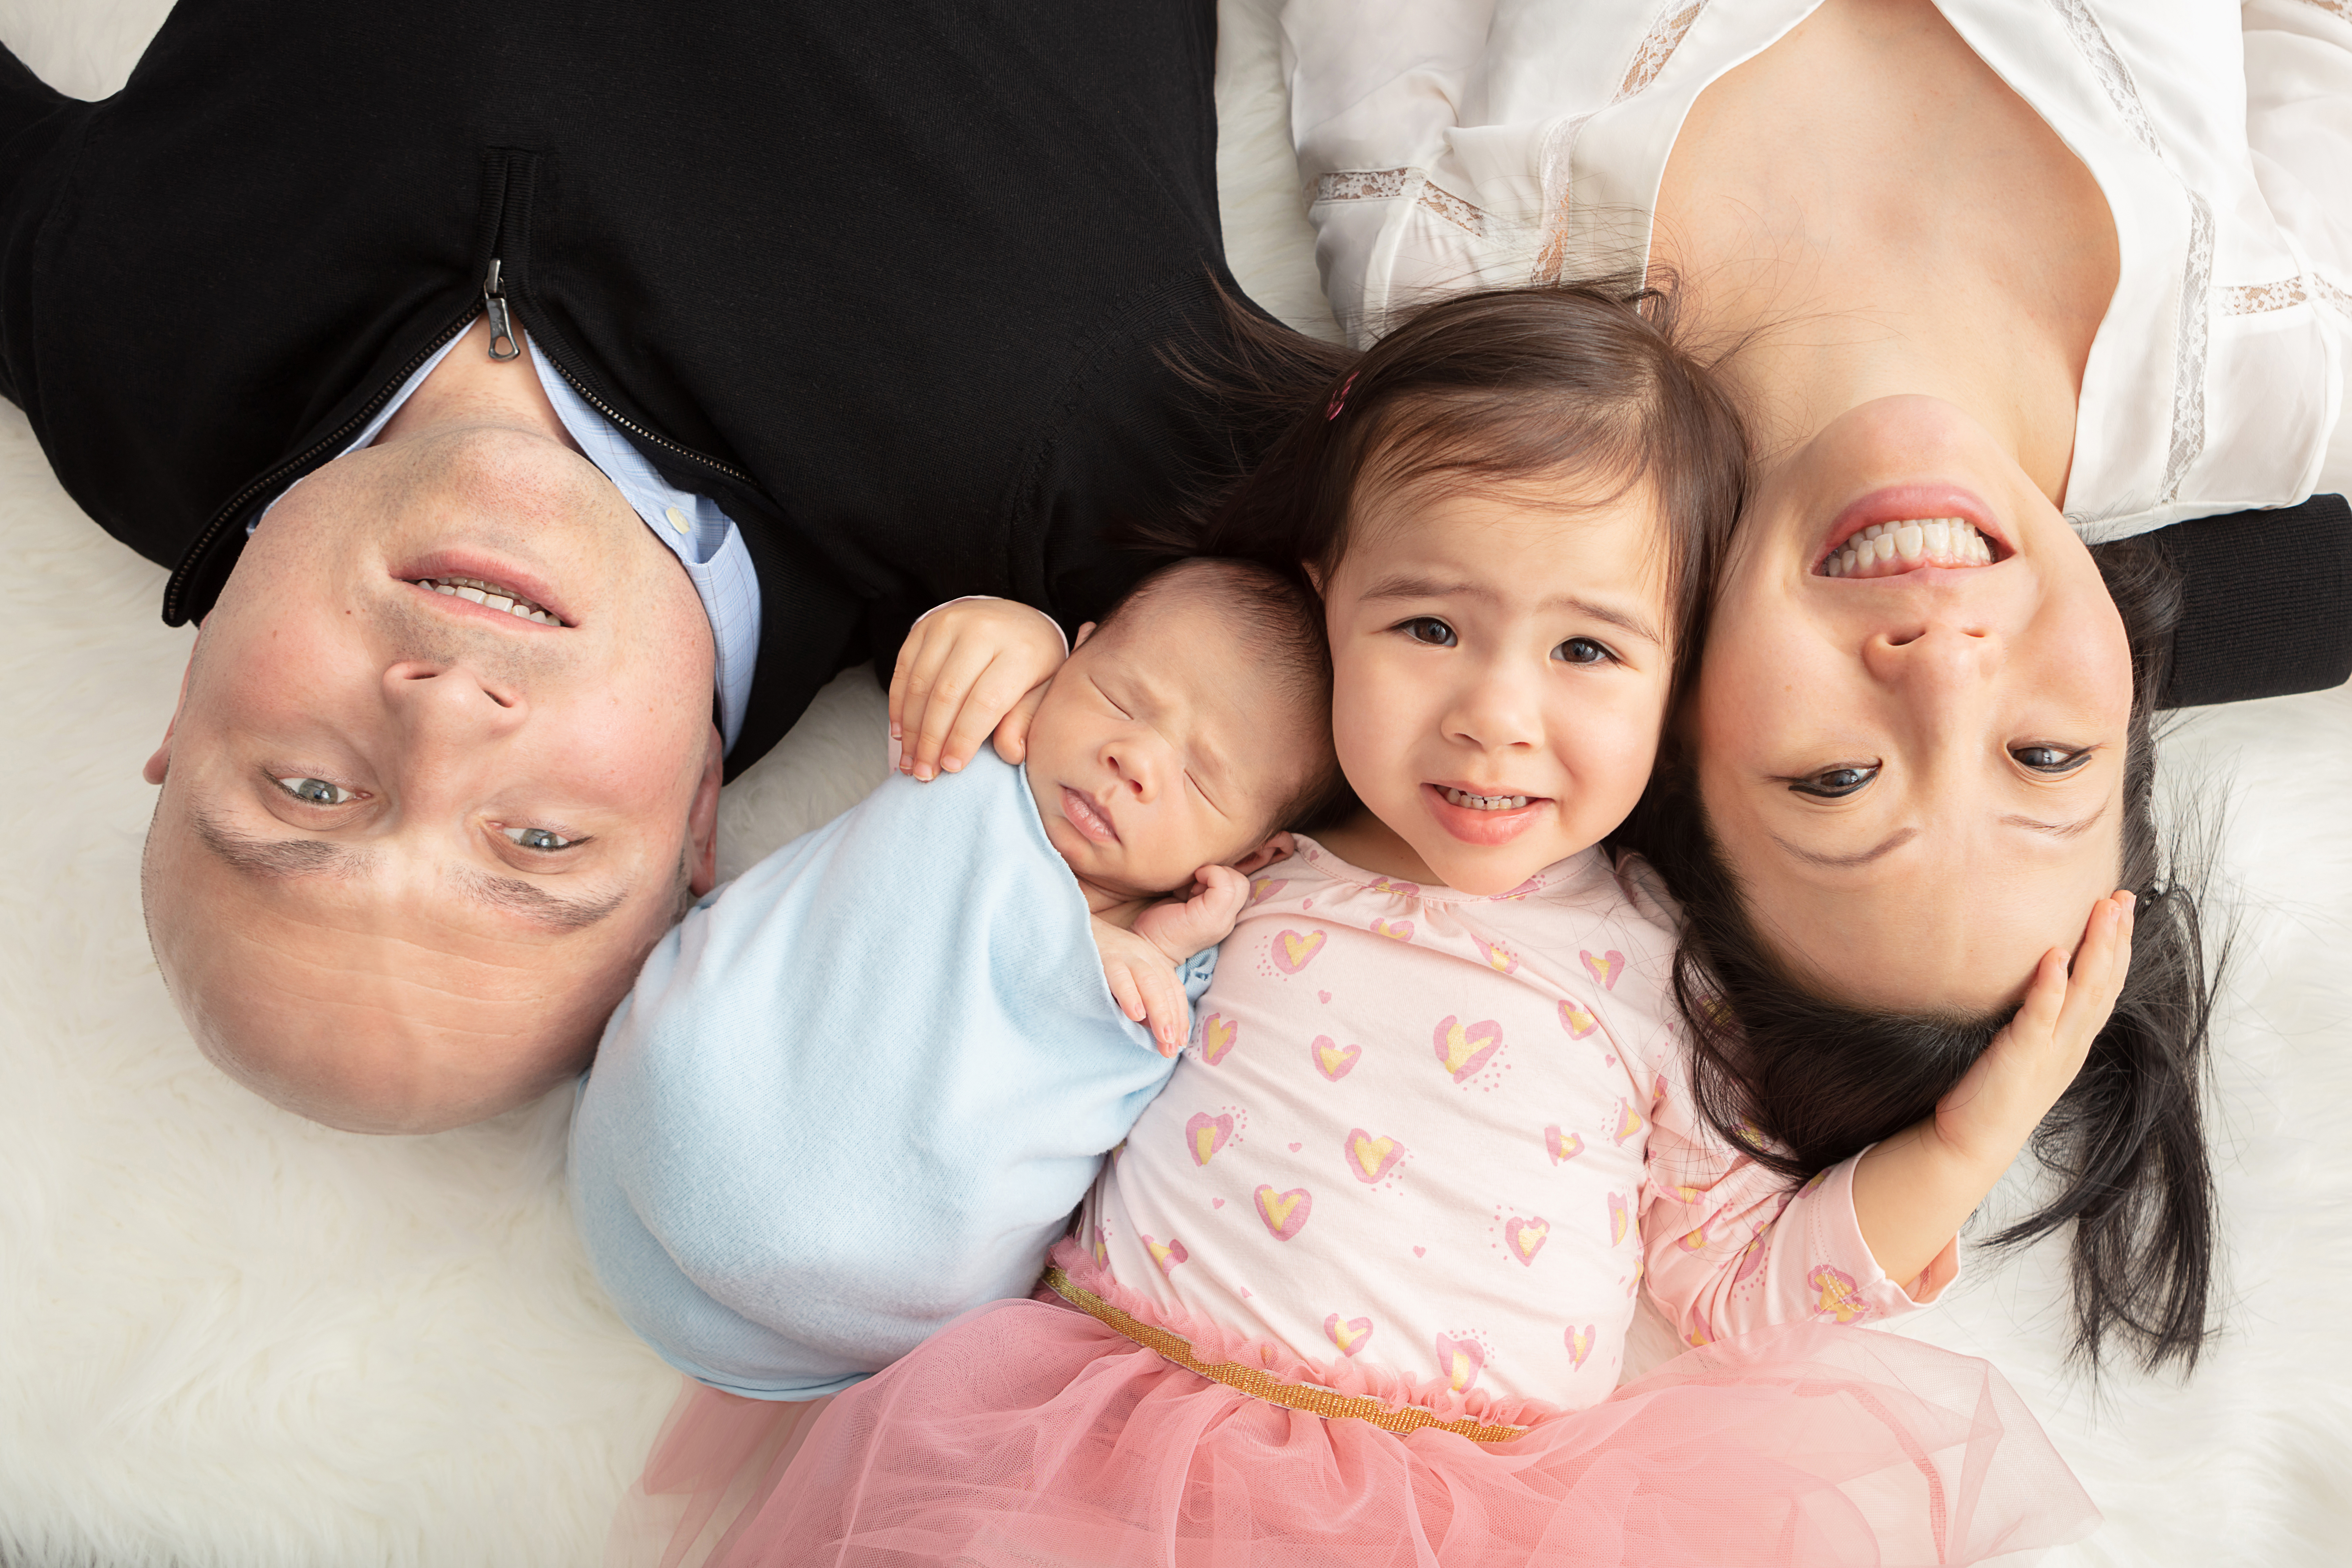 dad, newborn baby boy, big sister, and mom lying on a cream colored blanket and smiling upward